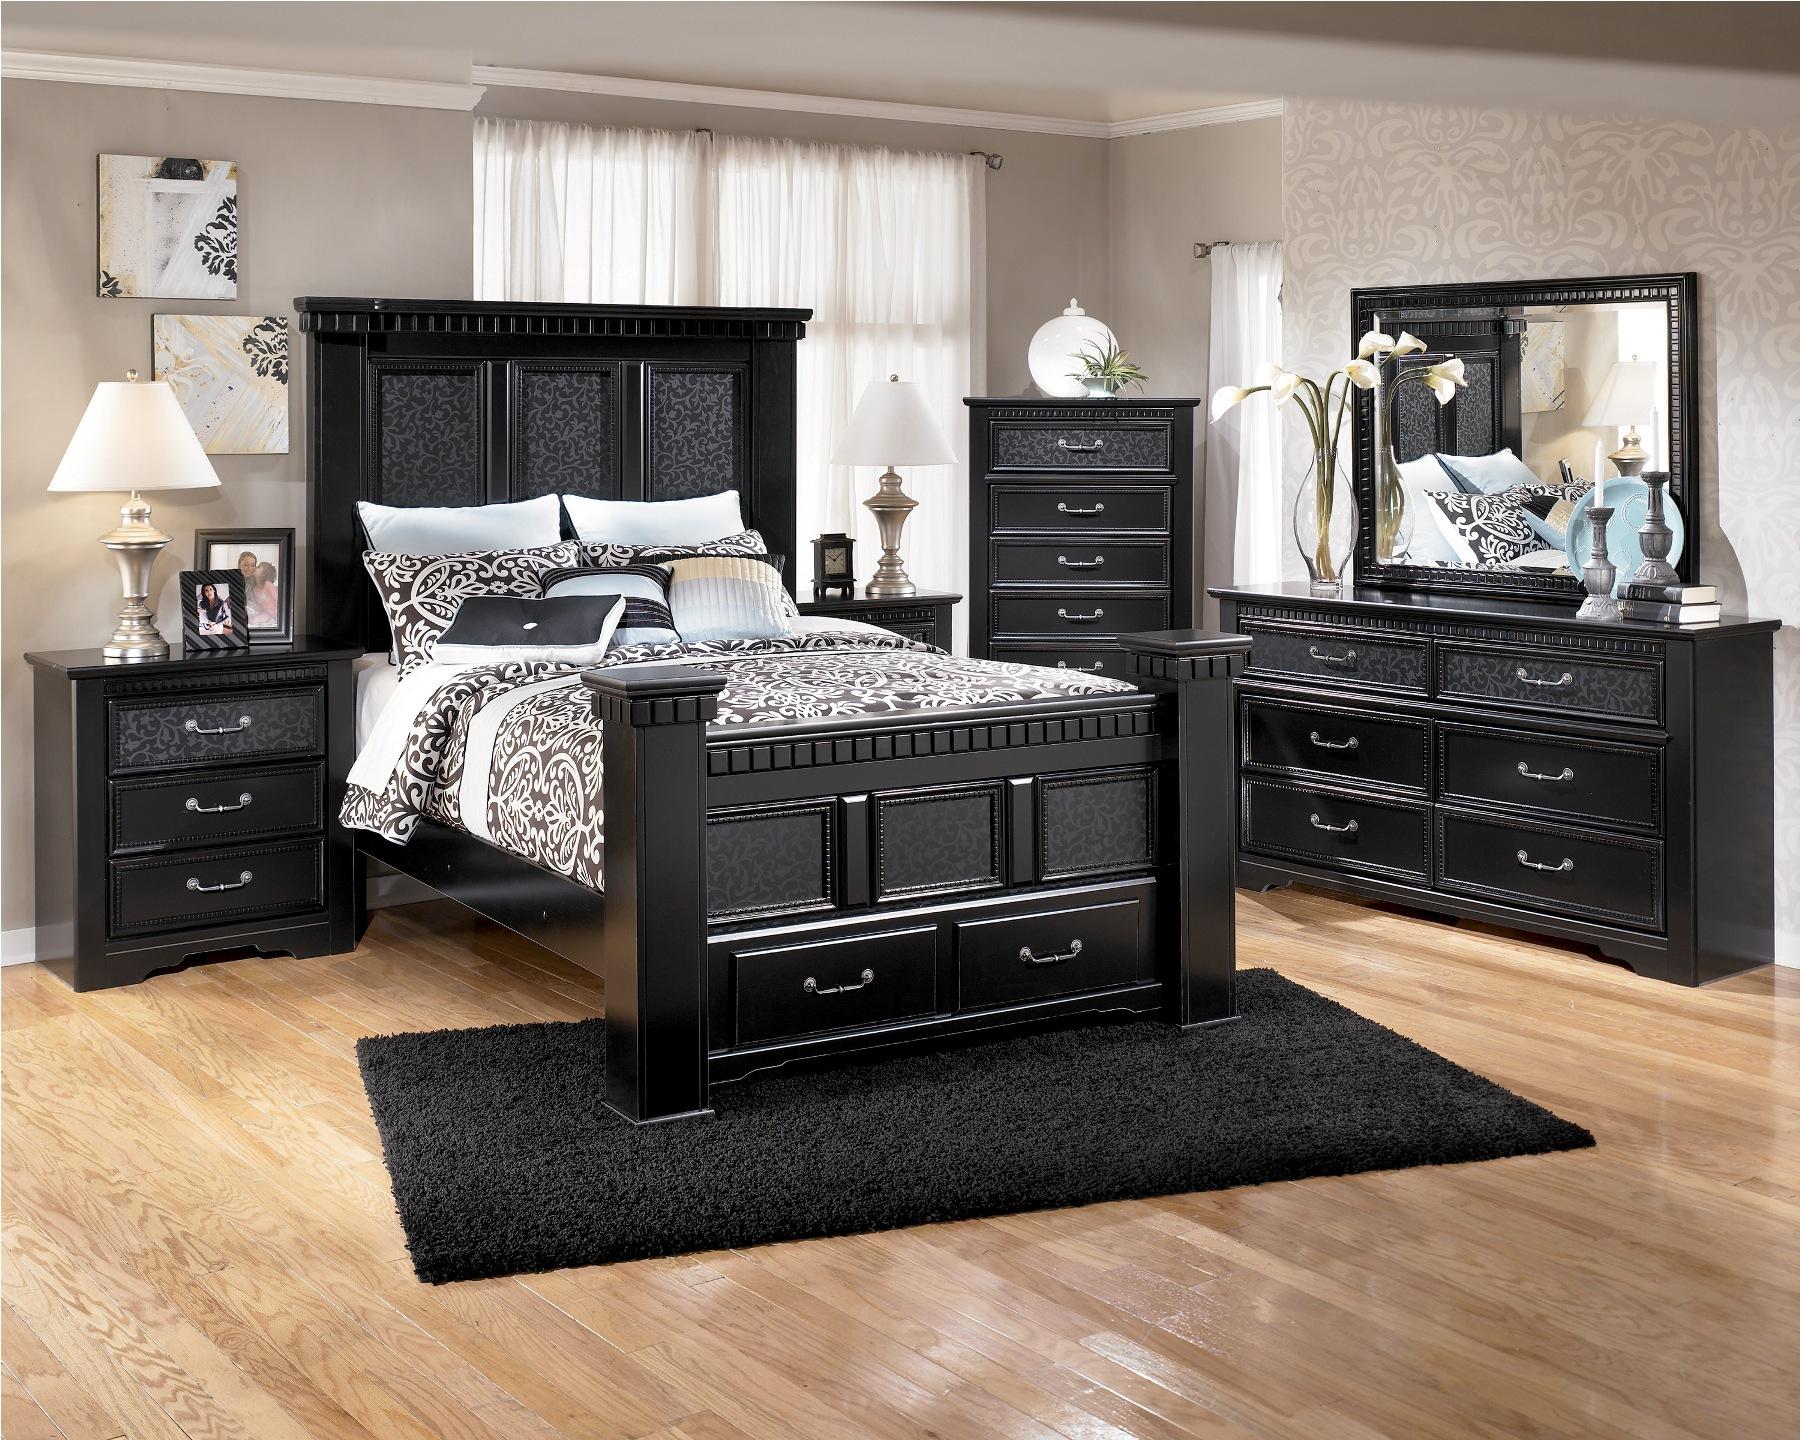 bedroom themes for black furniture